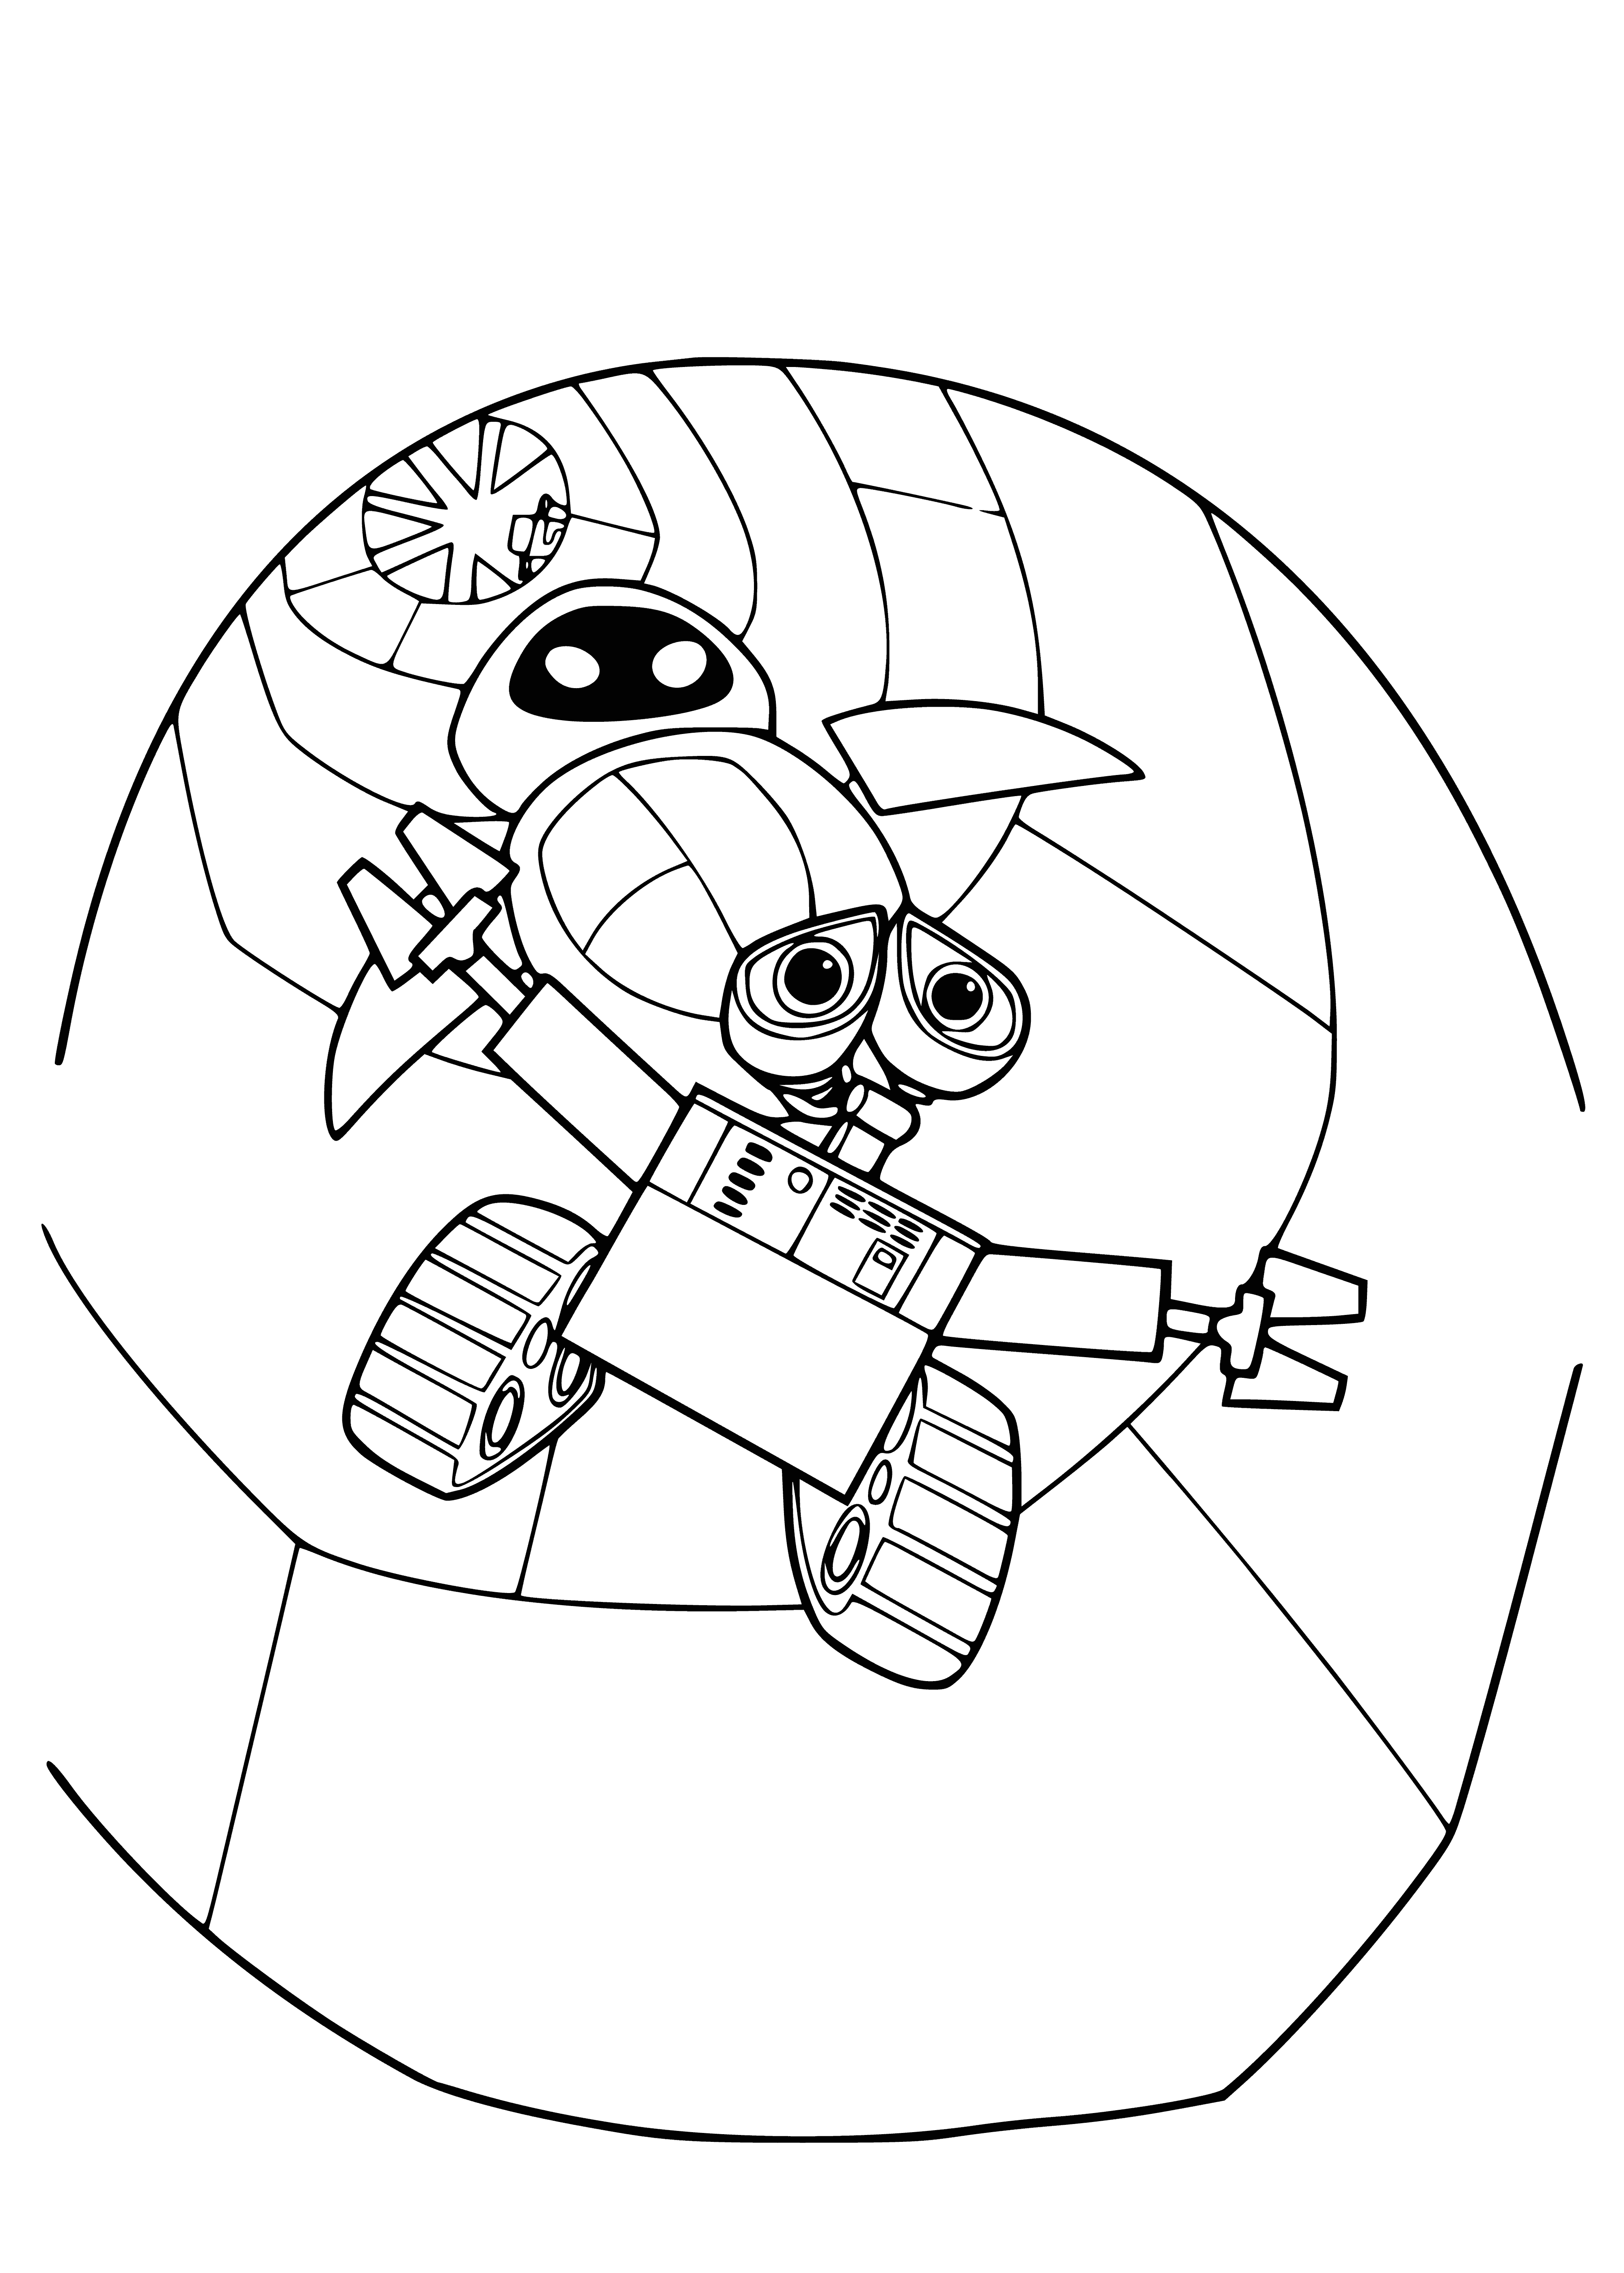 coloring page: Two robots with big eyes hold hands in the center of a green valley surrounded by mountains. #Robots #Friendship